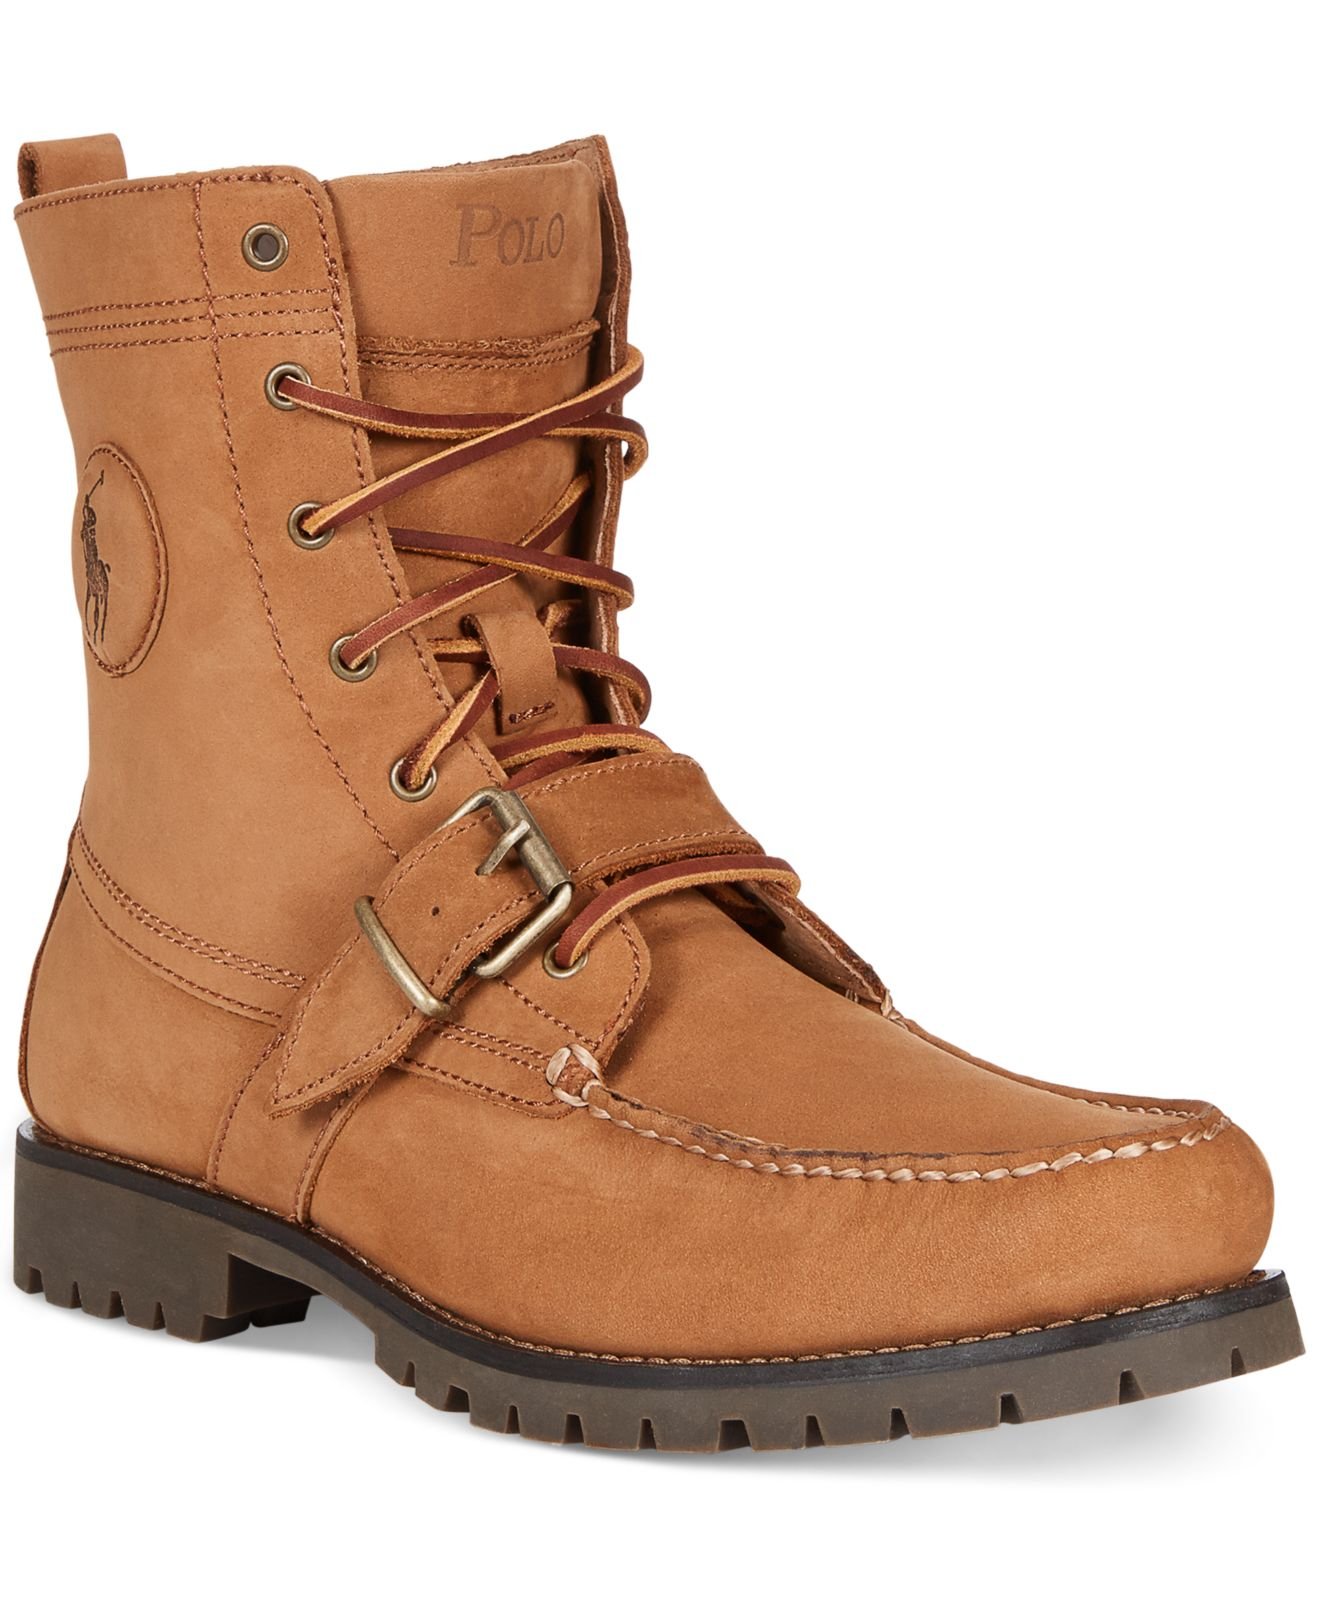 polo ranger boots tan suede online -